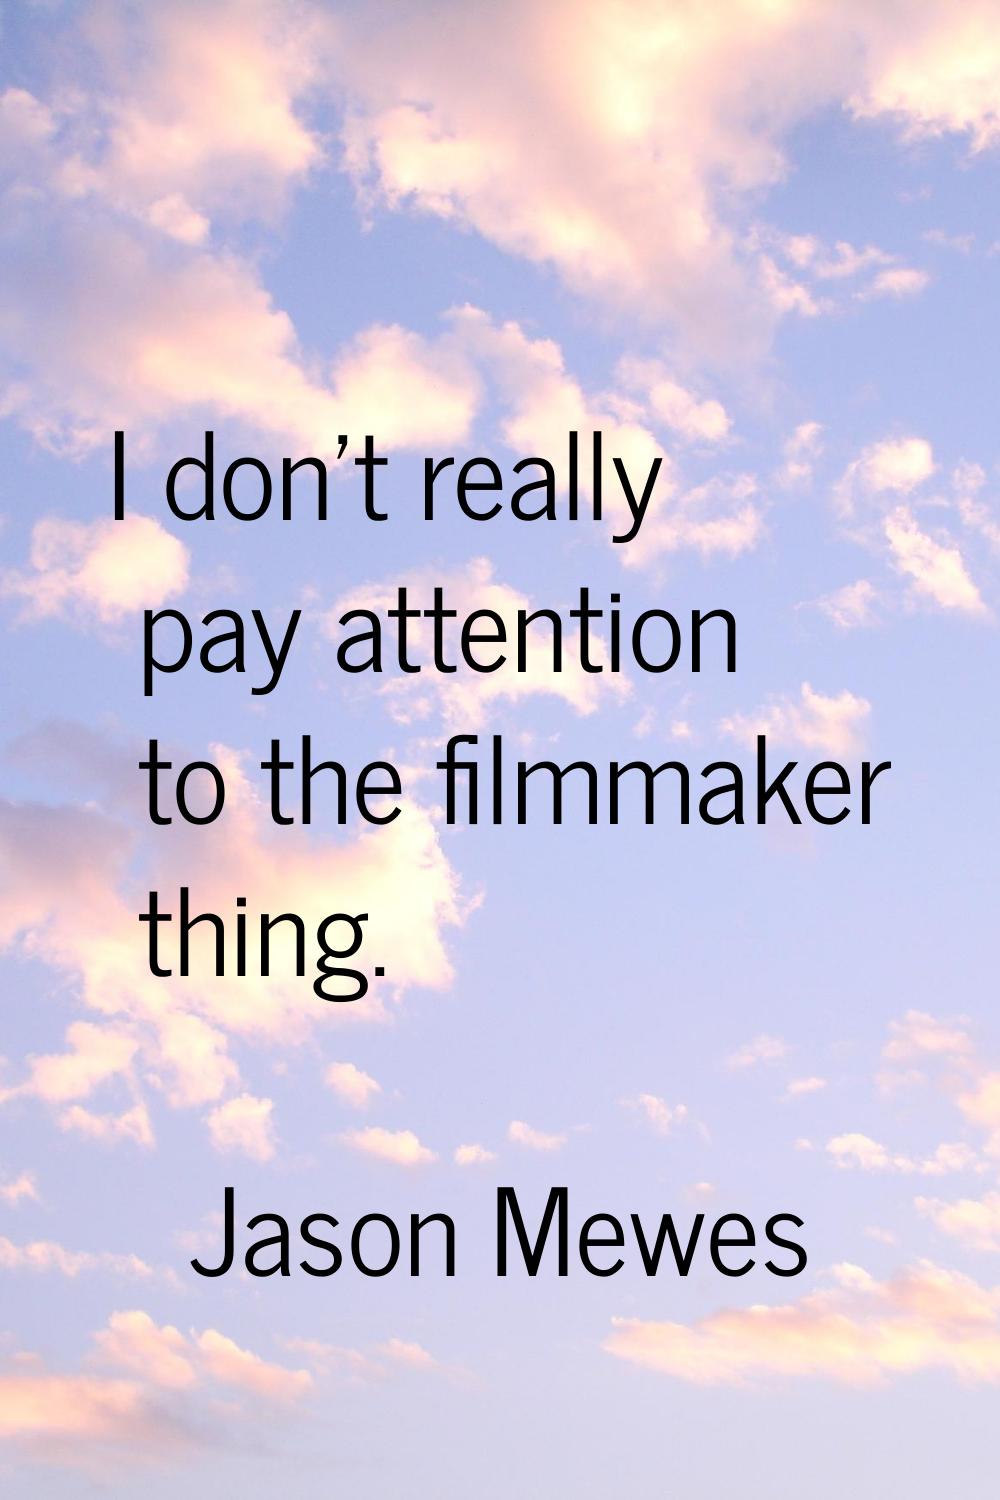 I don't really pay attention to the filmmaker thing.